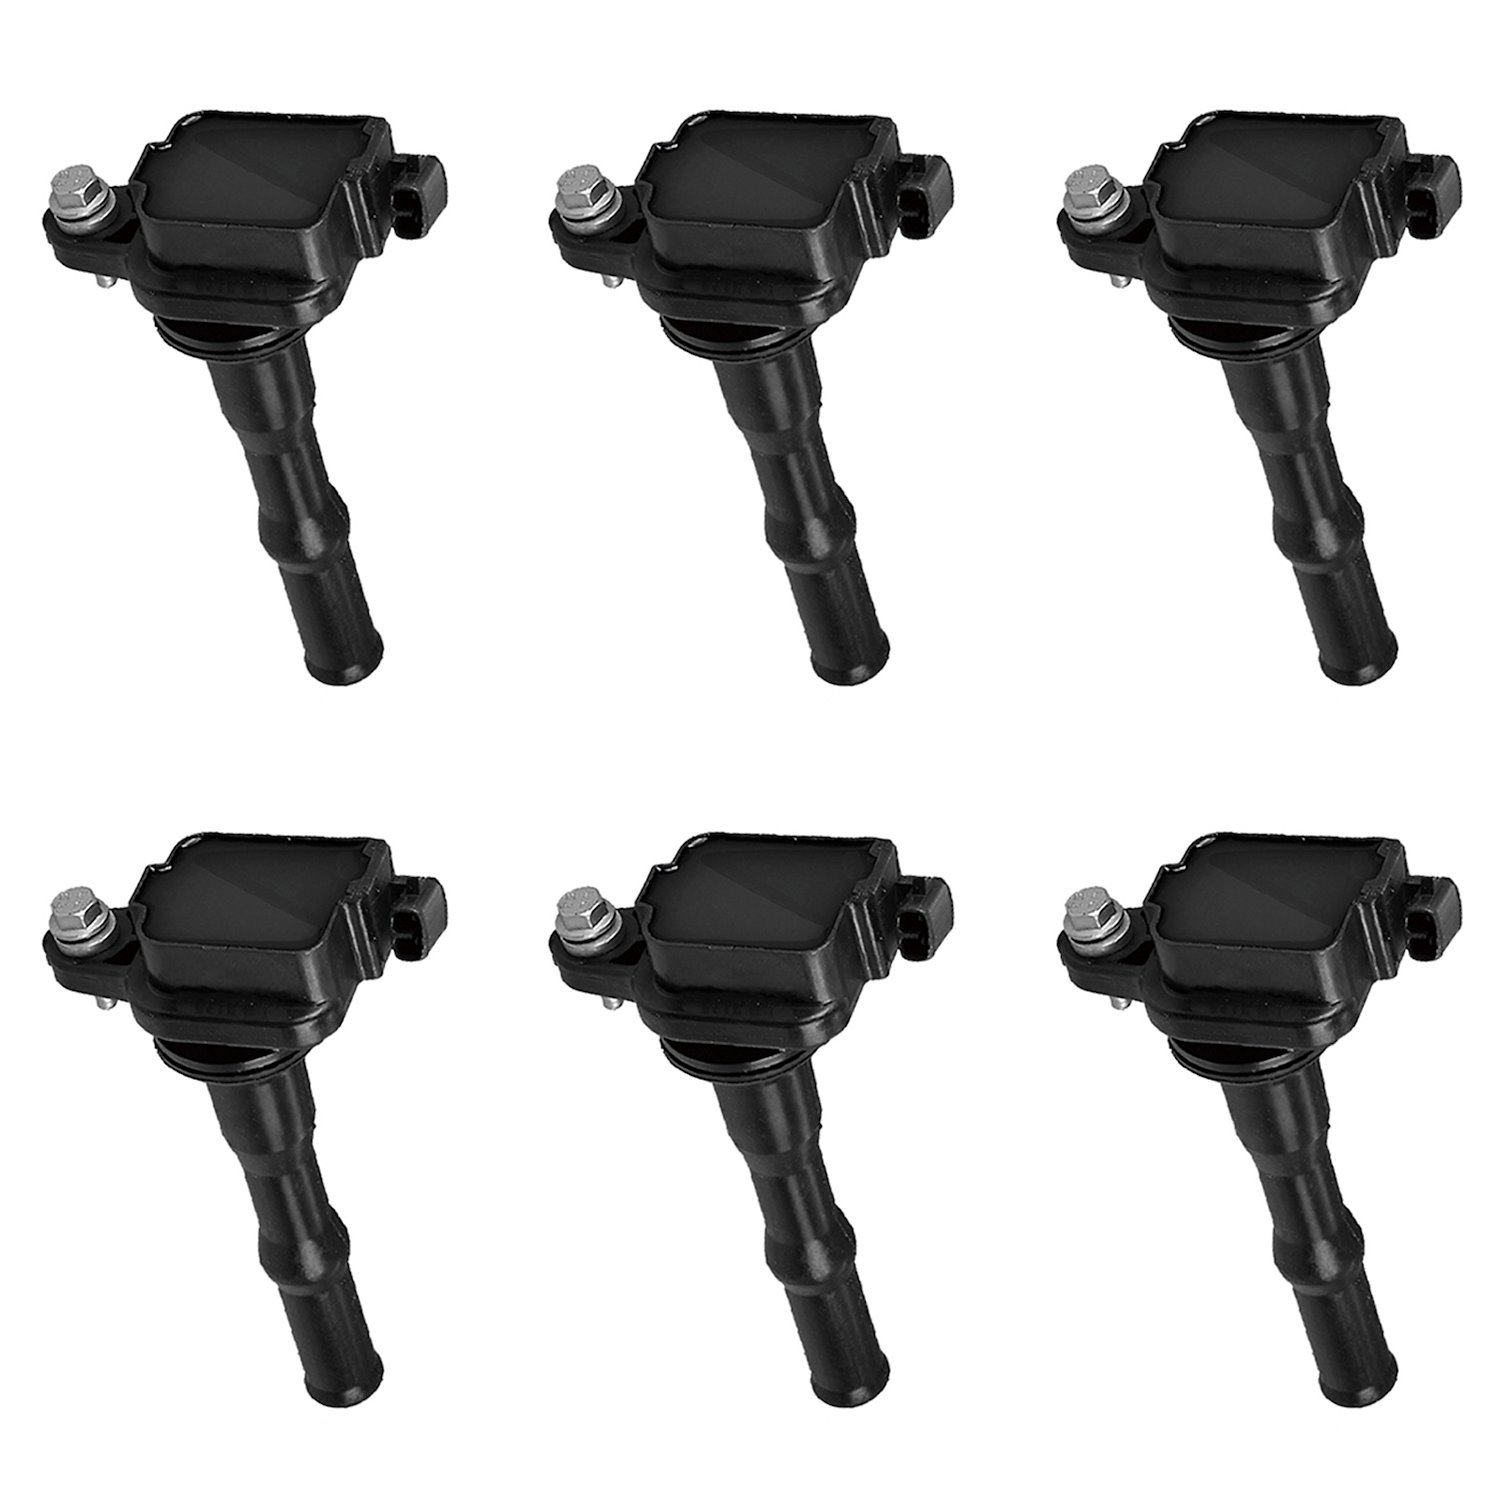 OE Replacement Ignition Coils for Toyota Avalon Camry Lexus ES300